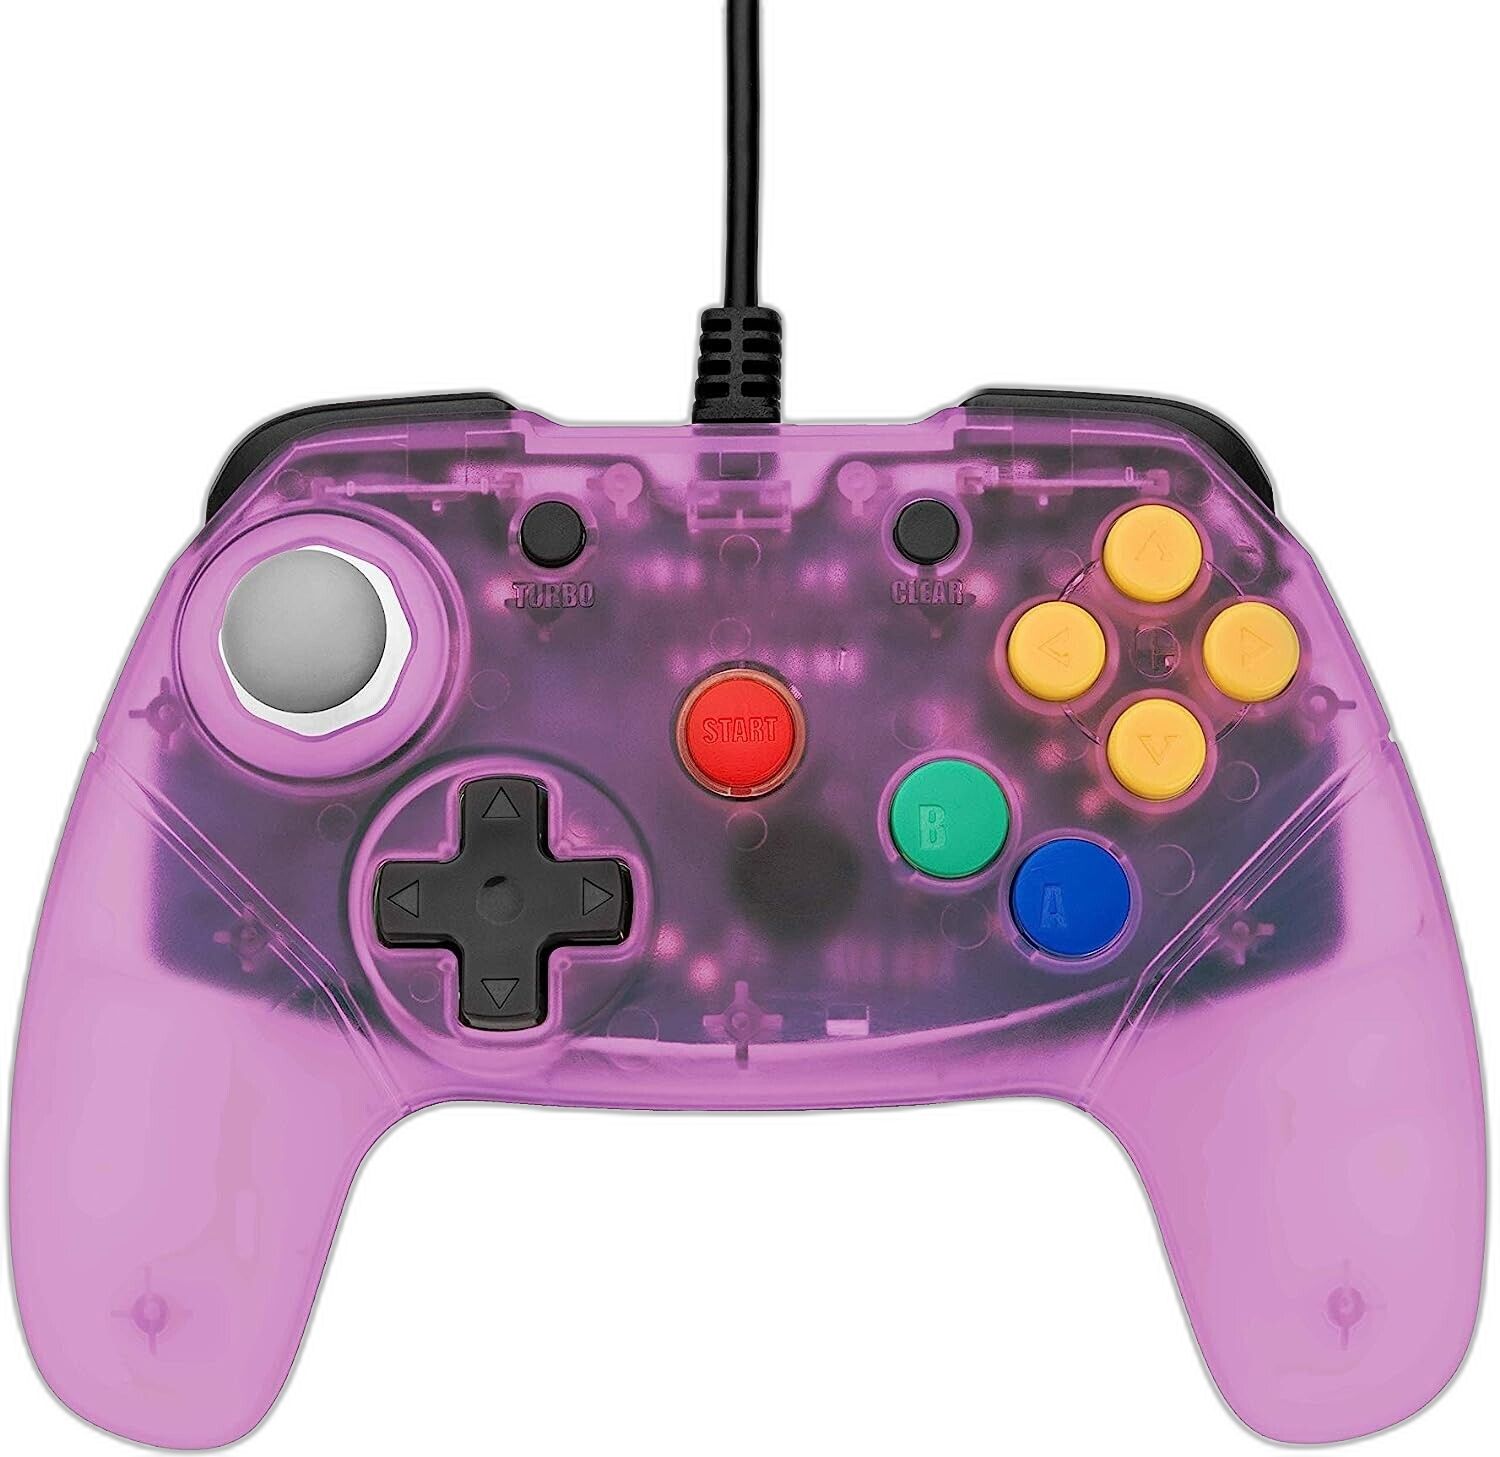  Retro Fighters Nintendo 64 Clear Violet Controller